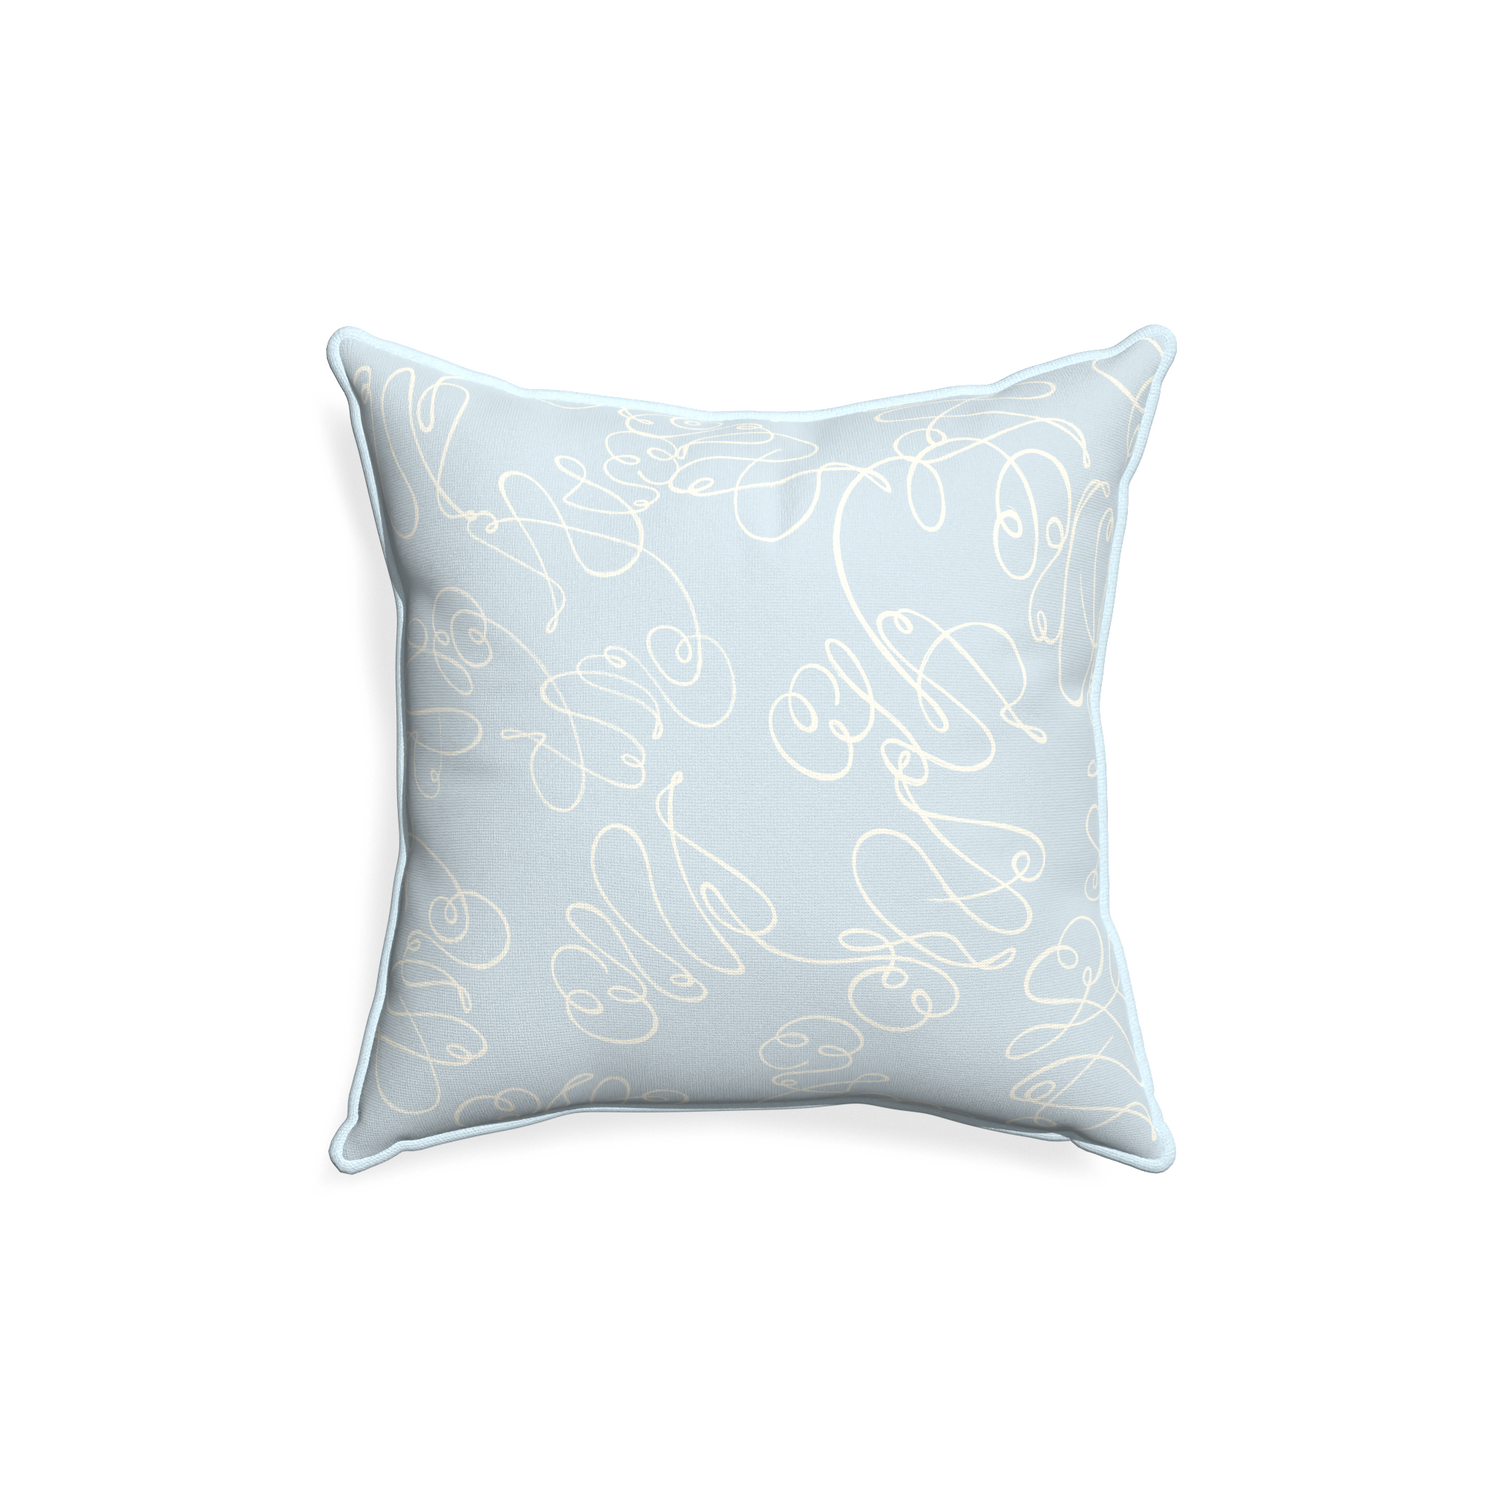 18-square mirabella custom pillow with powder piping on white background